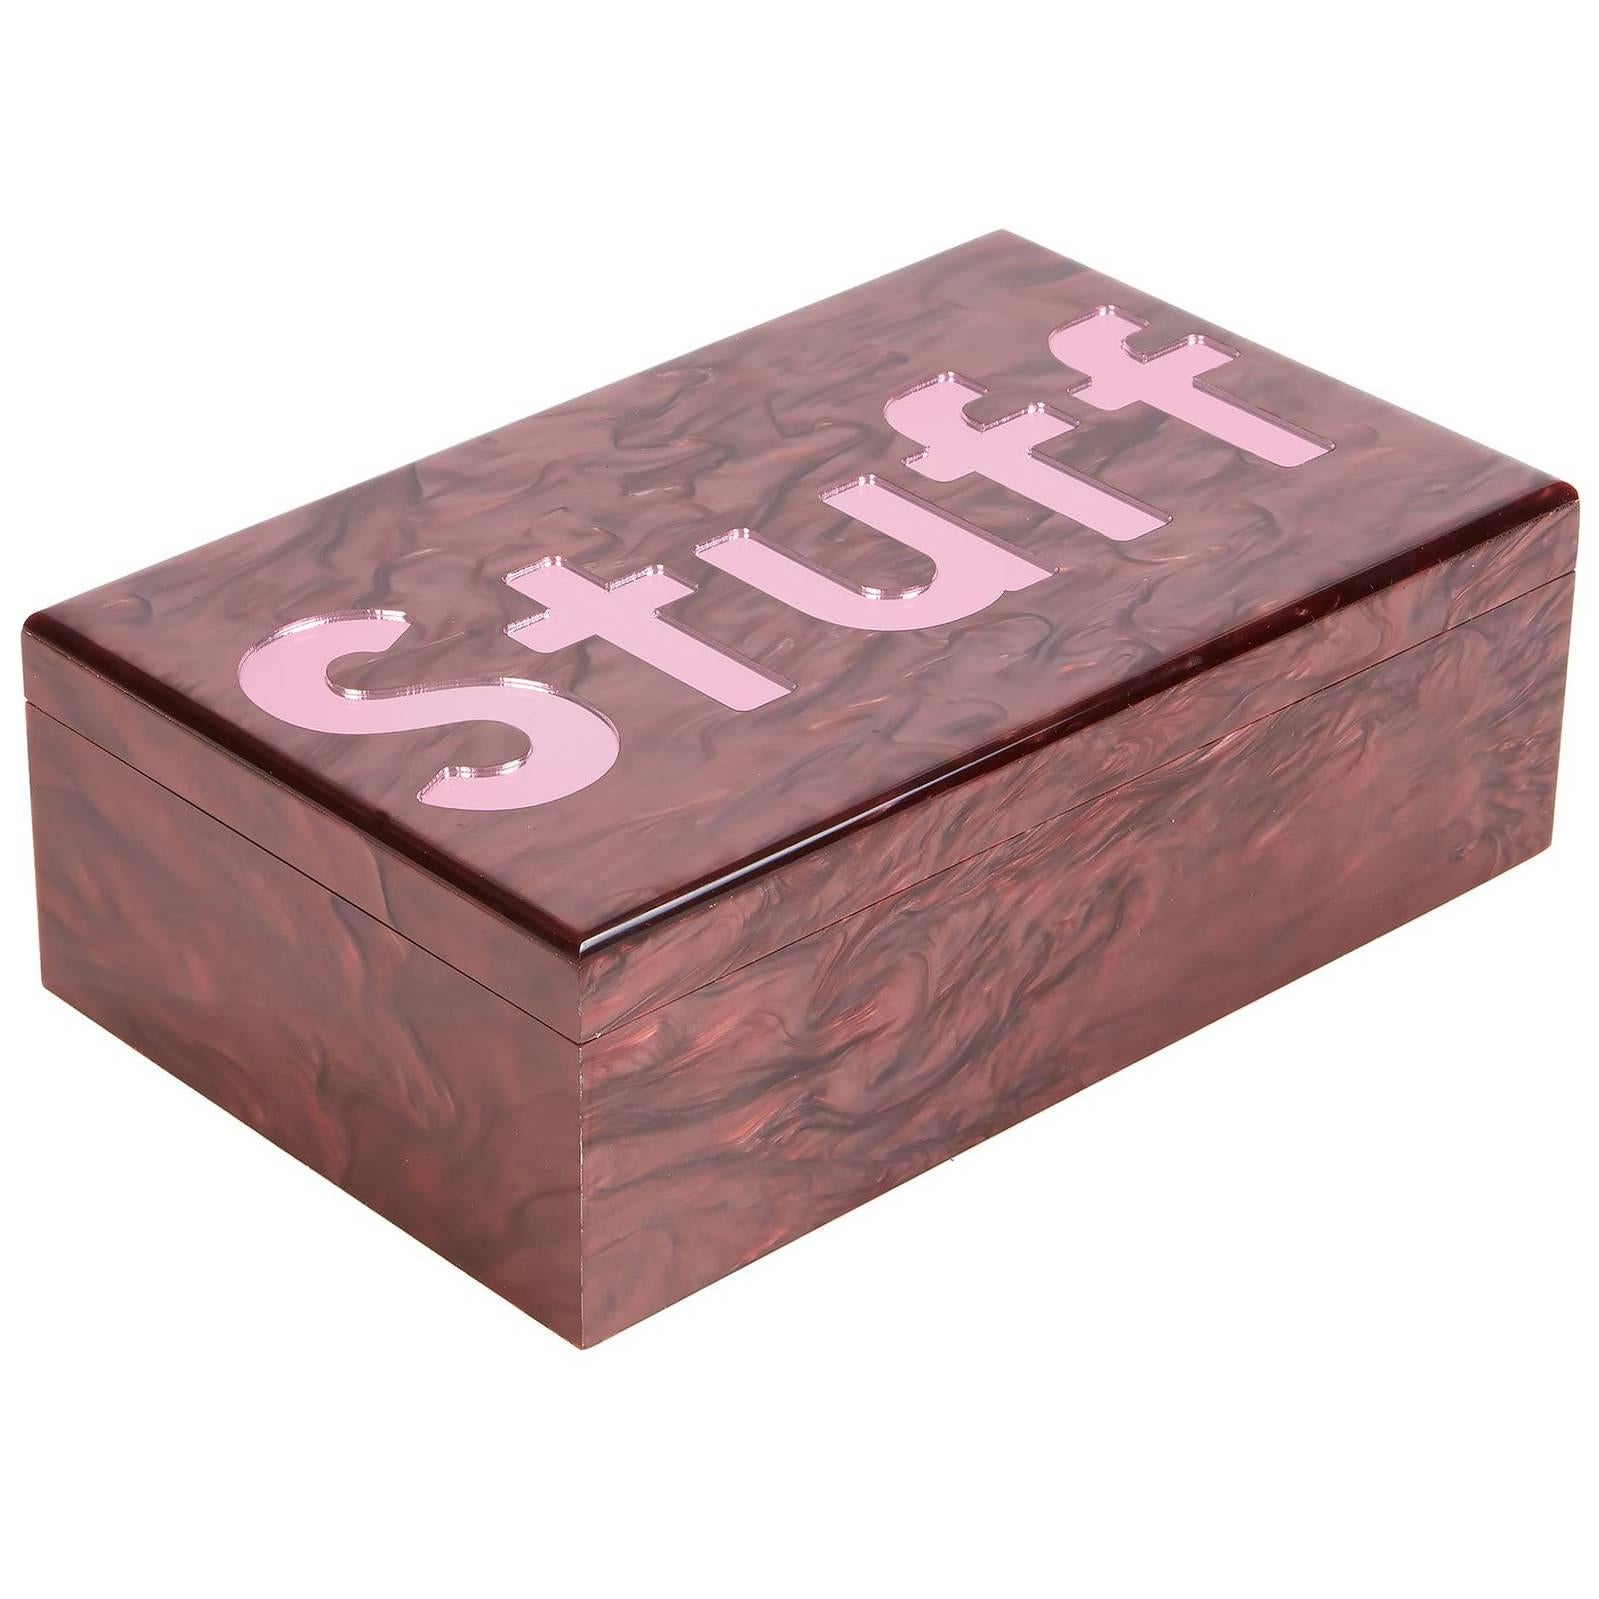 Edie Parker Stuff Box in Raisin Pearlescent with Pink Mirror Text For Sale